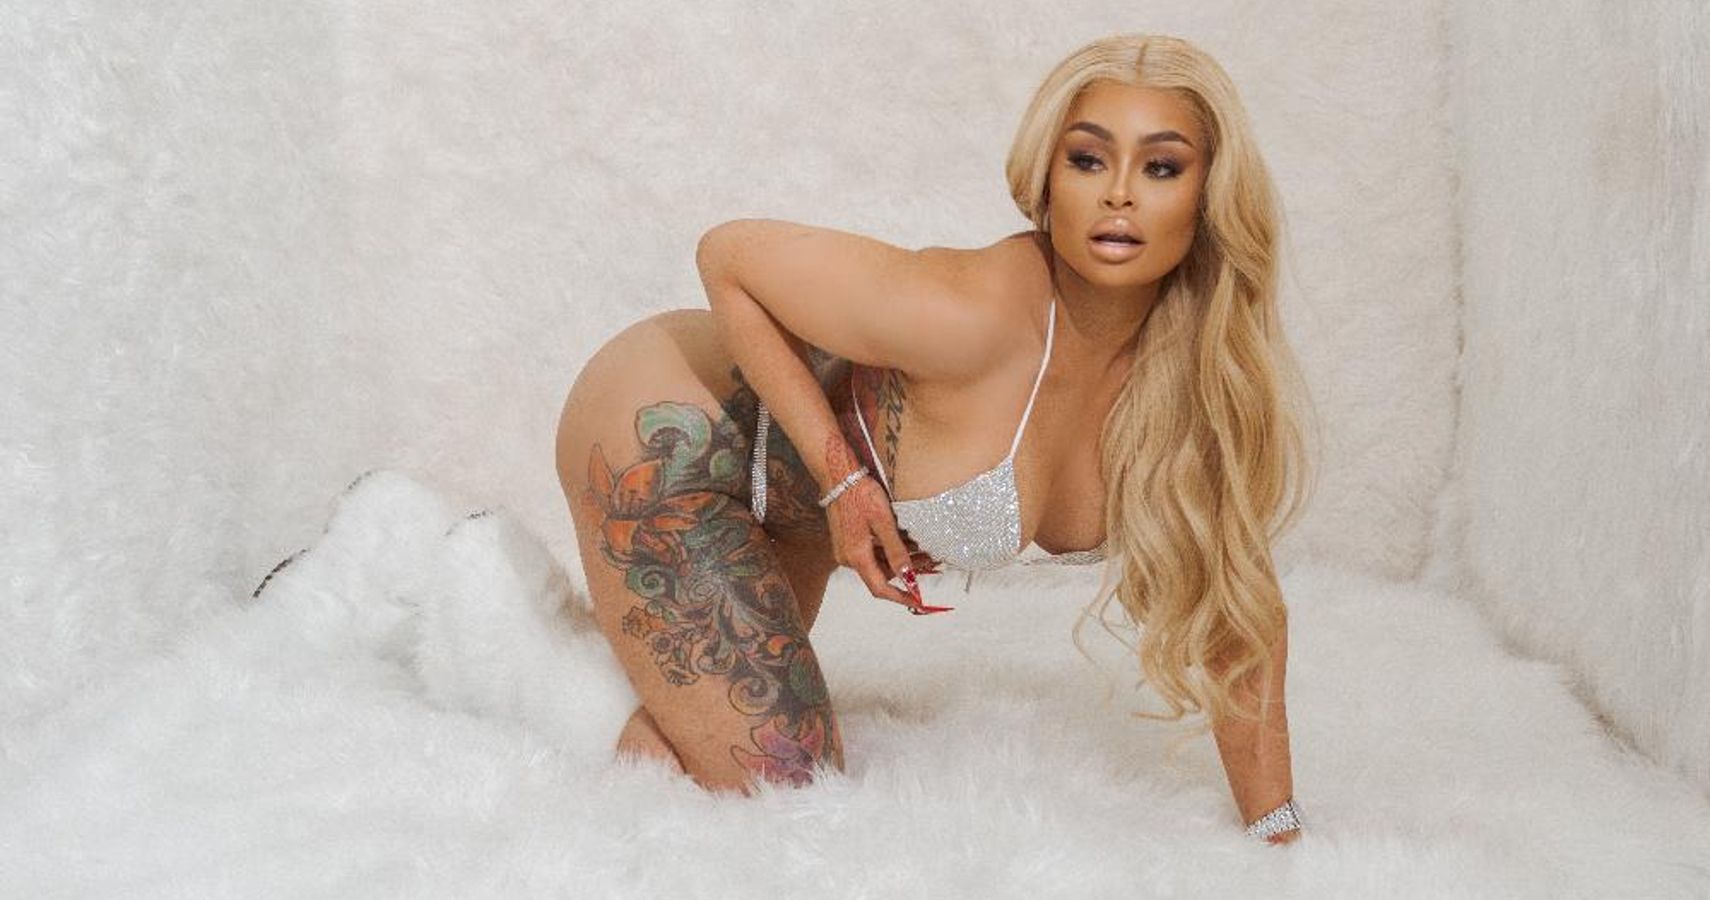 blac chyna onlyfans earnings